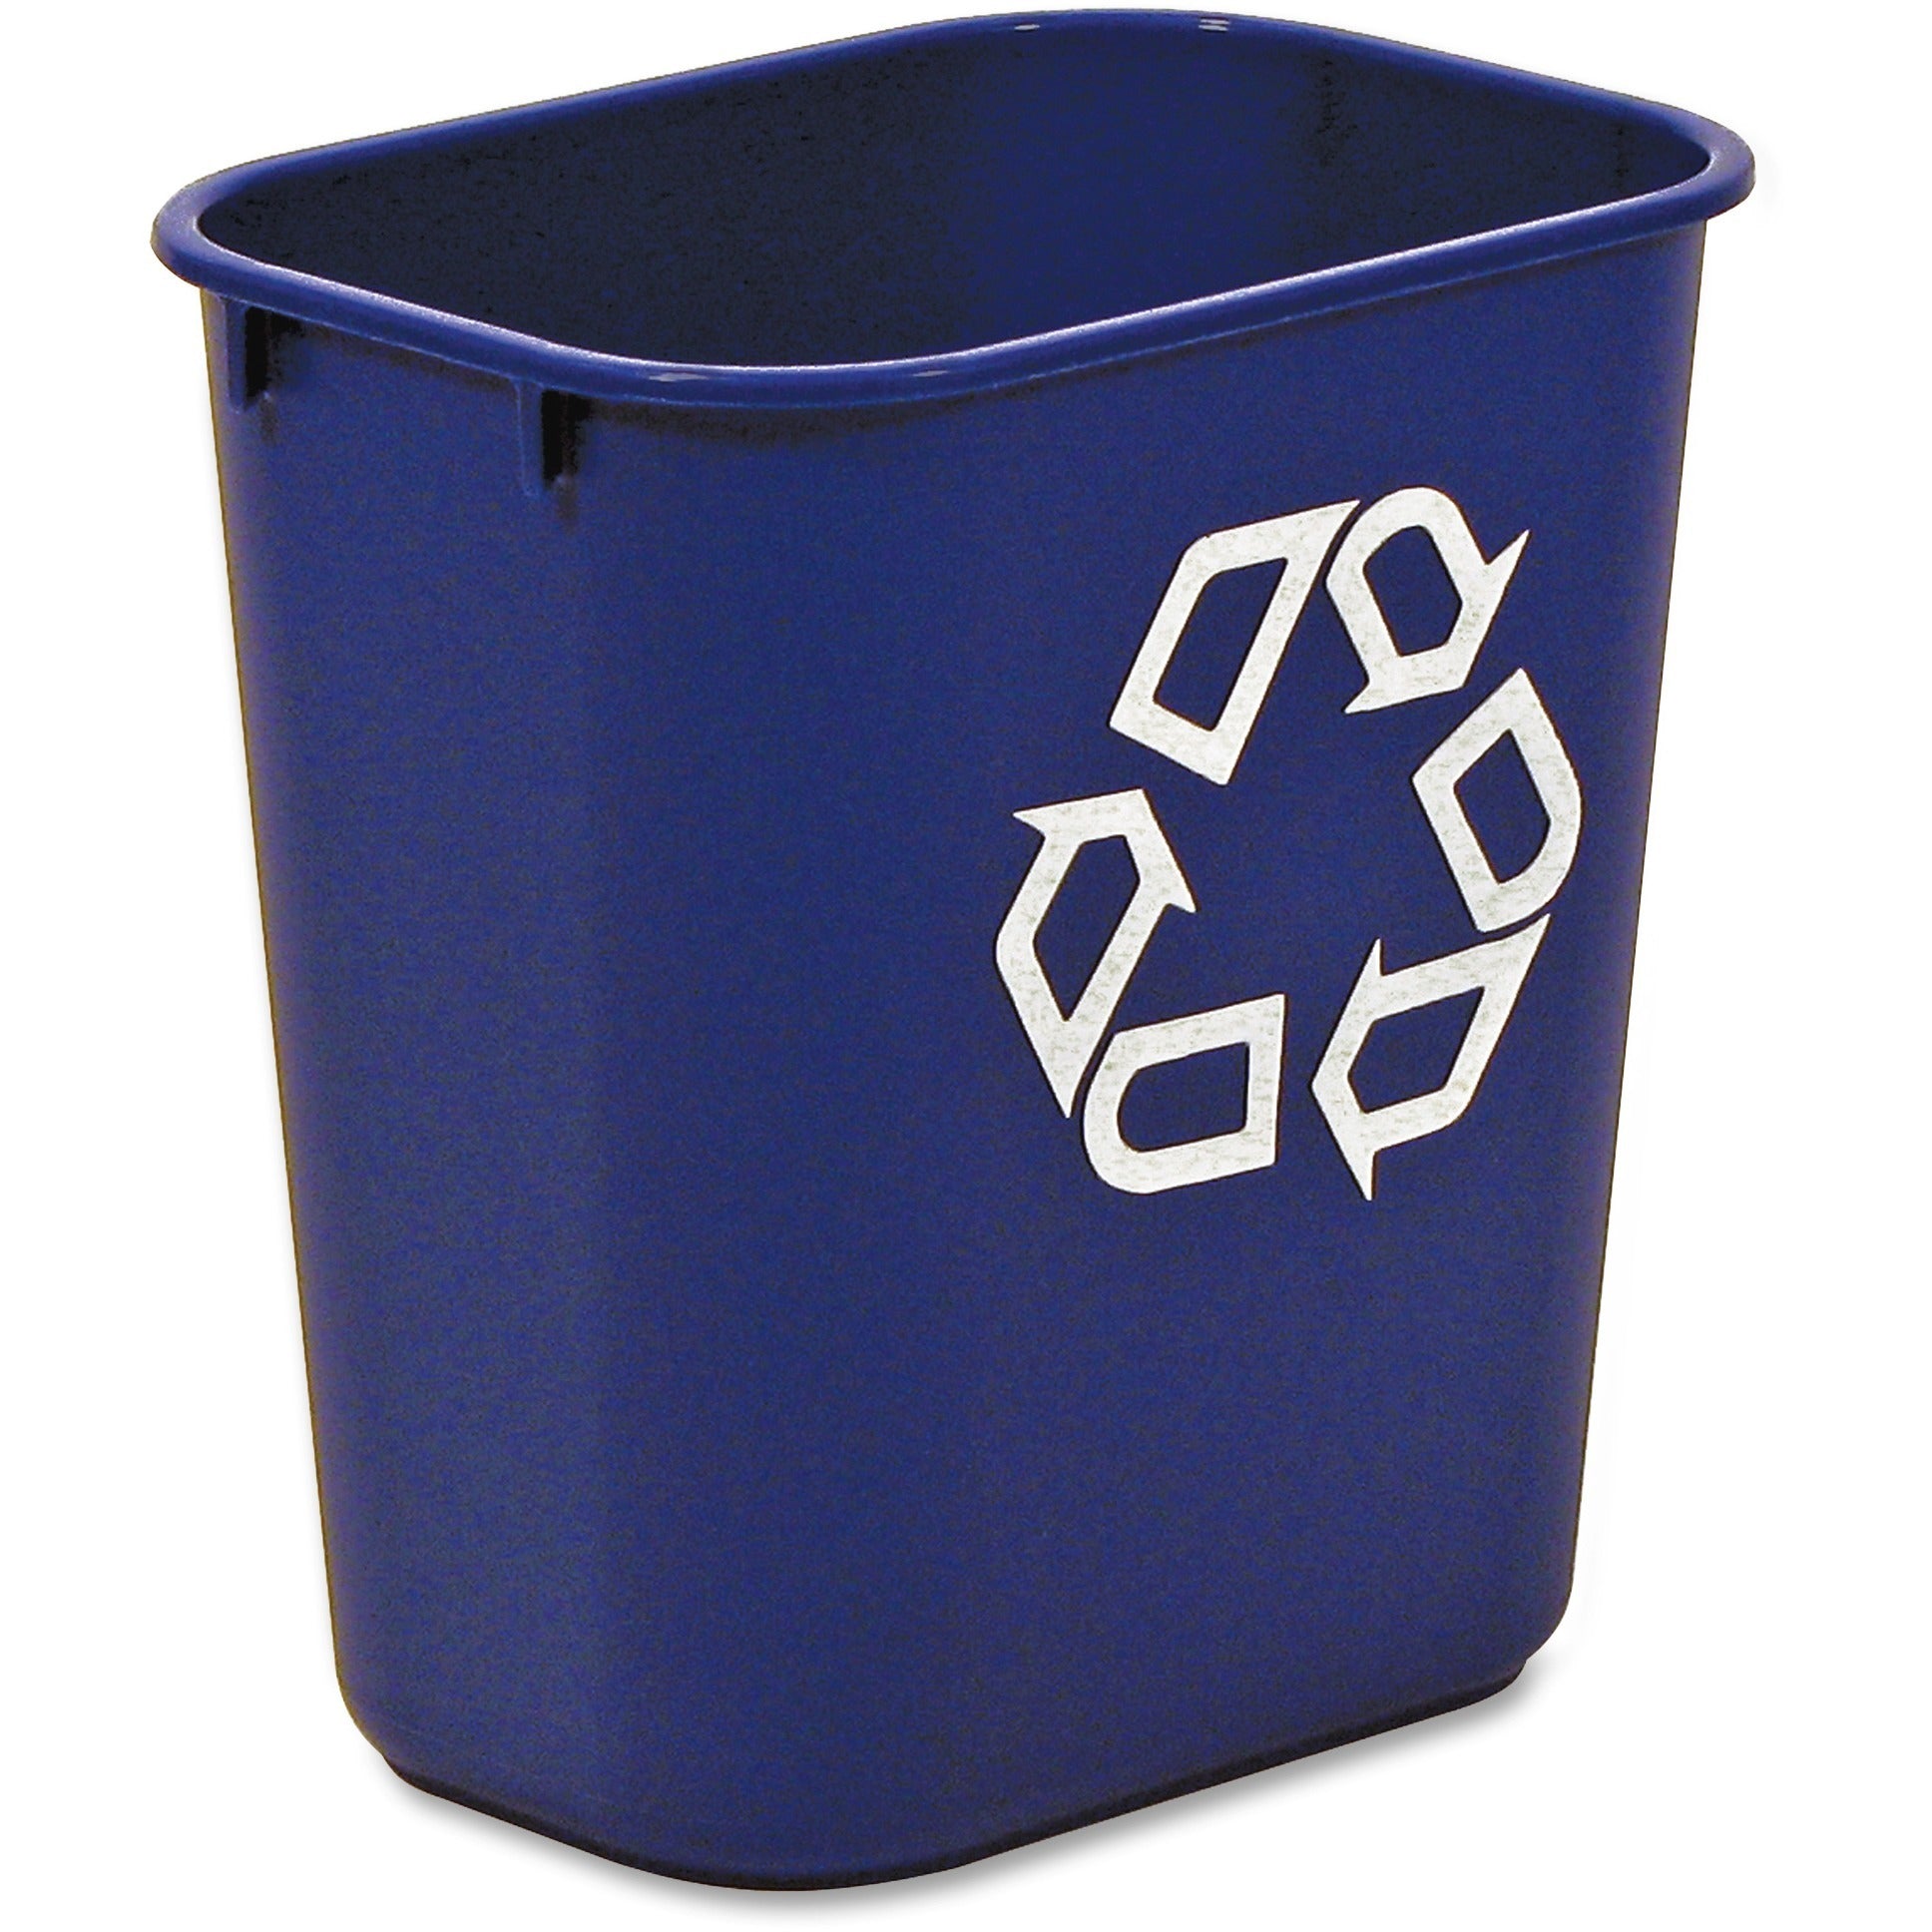 rubbermaid-commercial-13-qt-standard-deskside-recycling-wastebaskets-325-gal-capacity-rectangular-compact-durable-121-height-x-83-width-x-114-depth-resin-blue-12-carton_rcp295573bect - 2